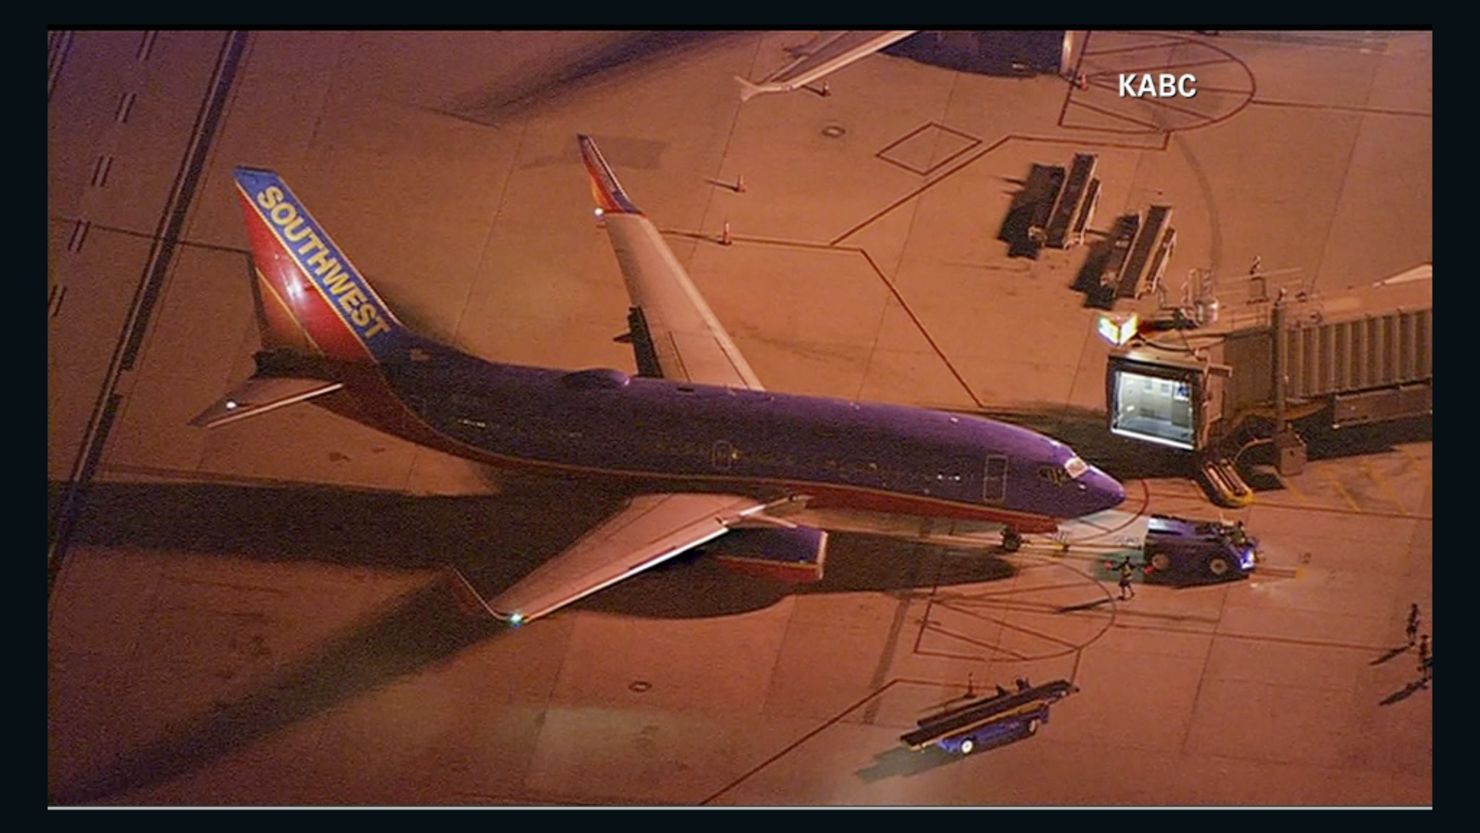 Southwest Airlines Flight 811 is held at John Wayne Airport in Santa Ana, California, on Tuesday night.